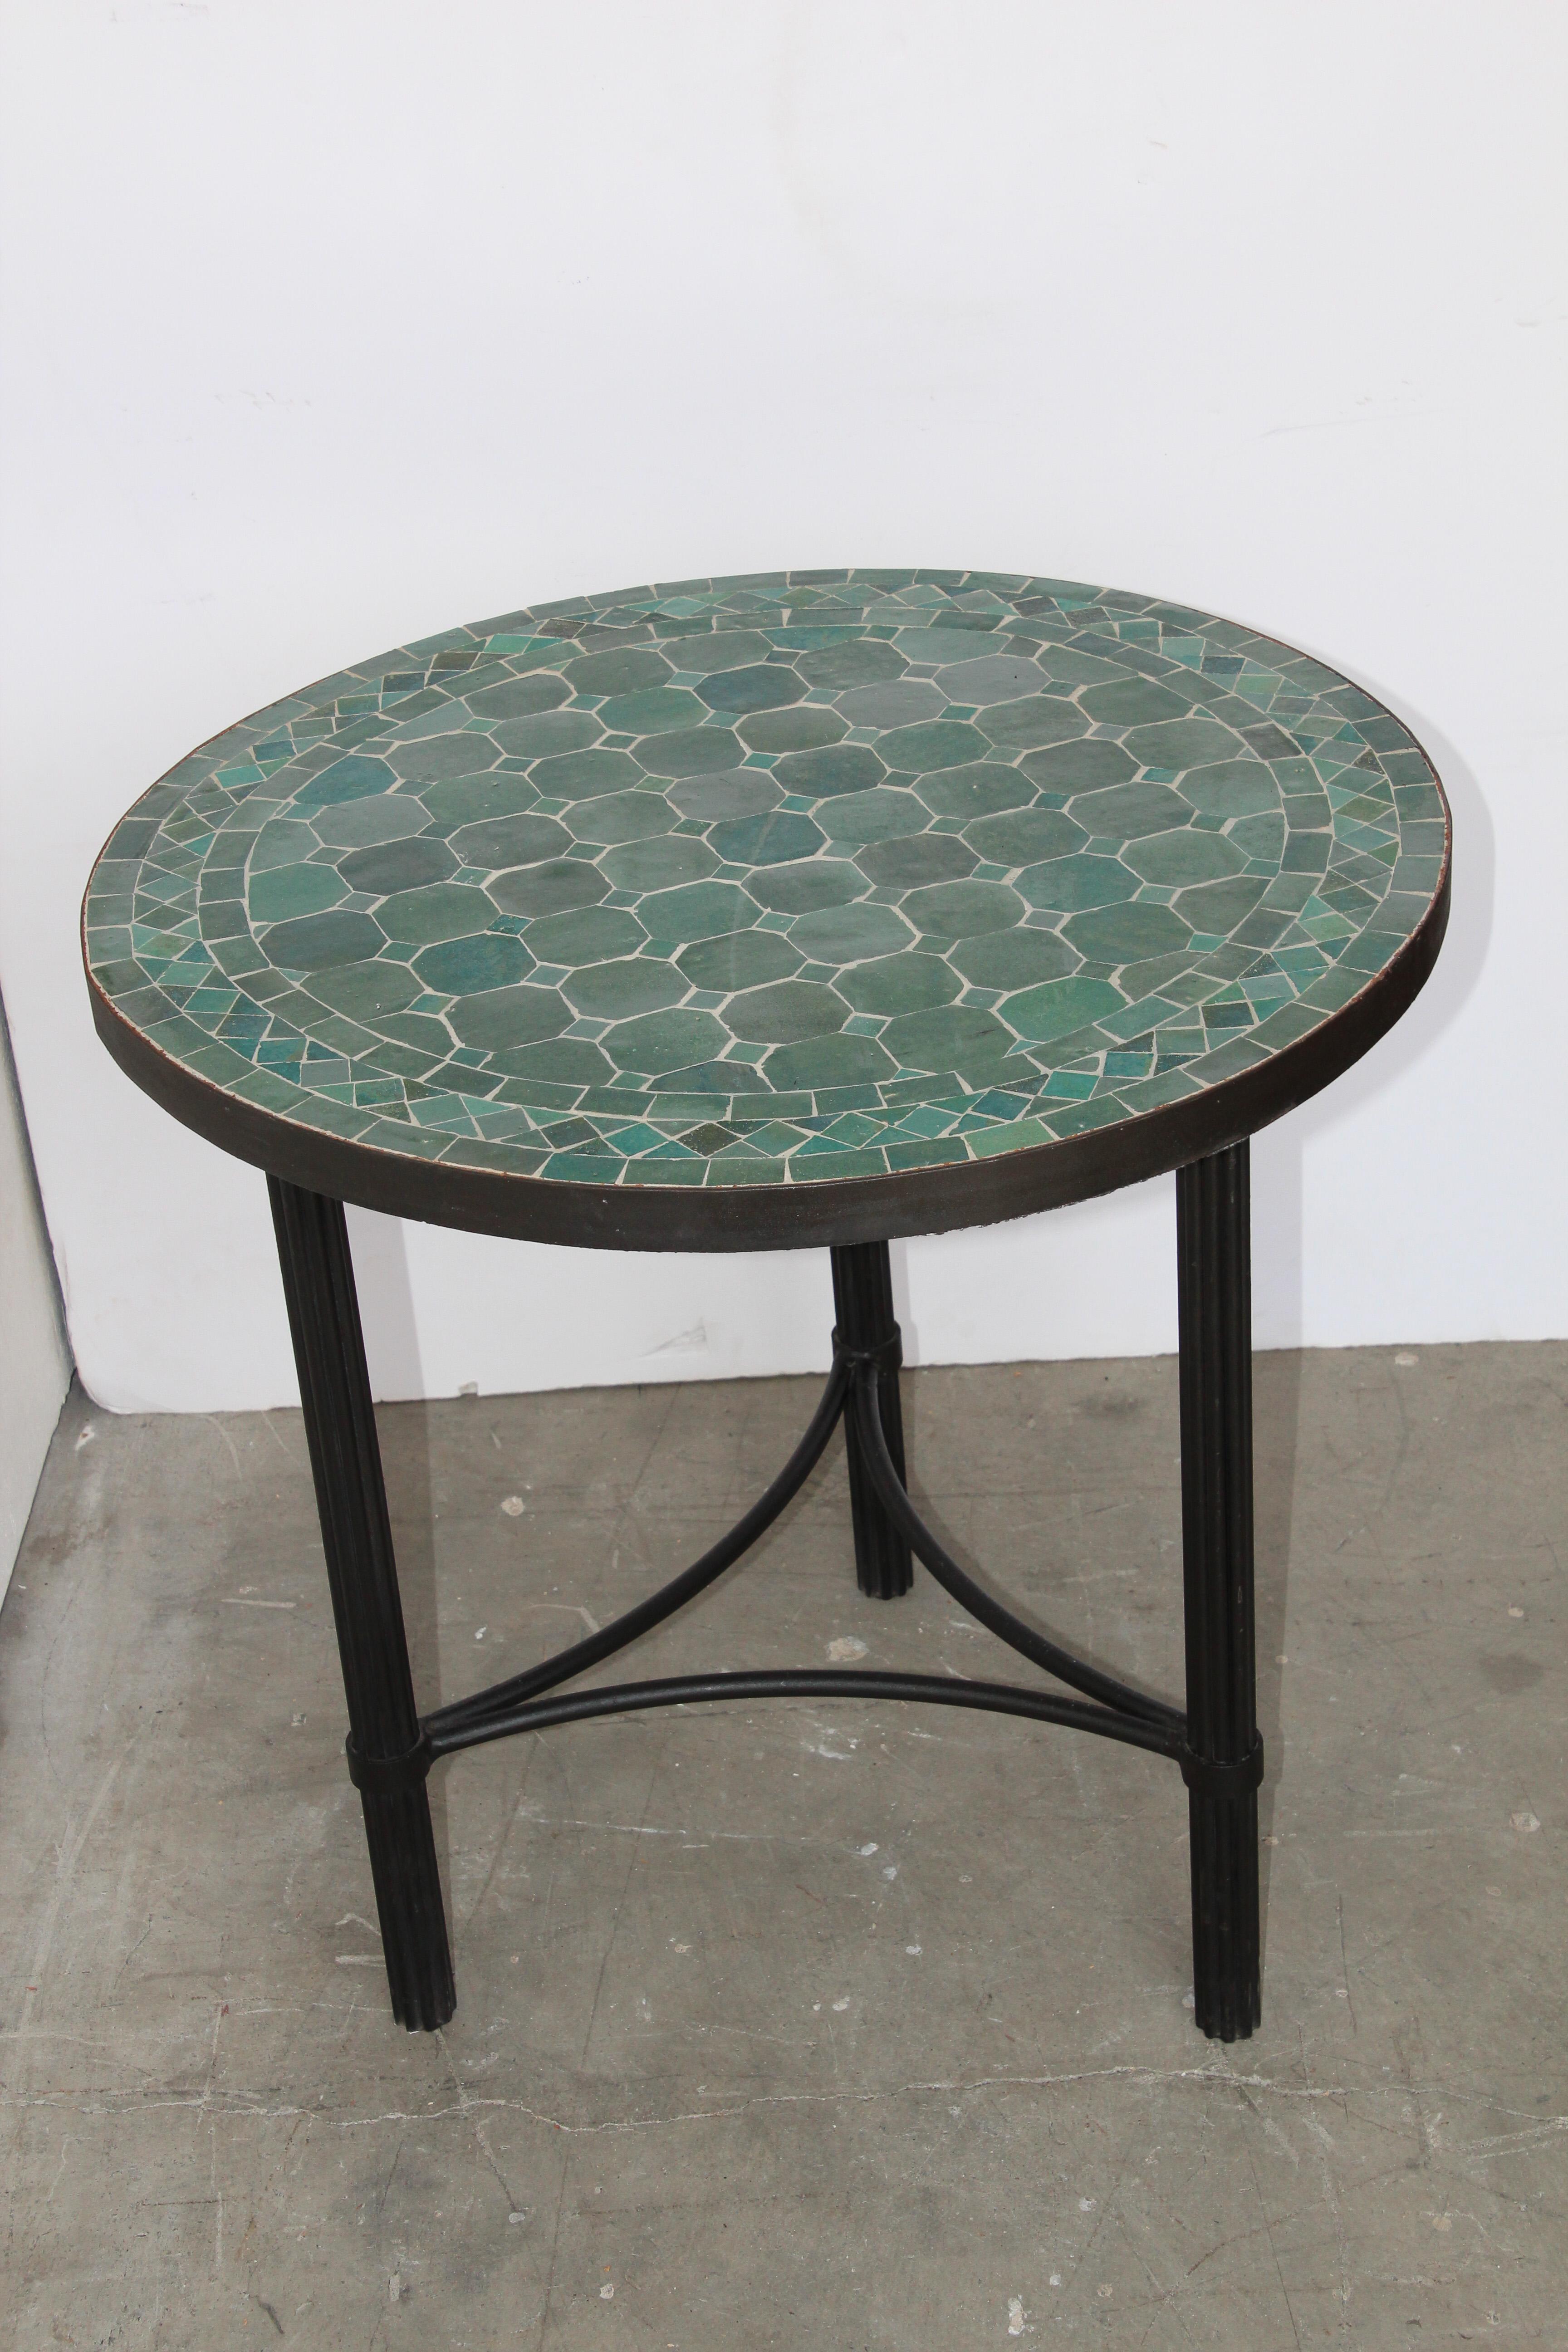 Moroccan mosaic tiles side table on iron base.
Handmade by expert artisans in Fez, Morocco using reclaimed old glazed green colors tiles inlaid in concrete and making beautiful geometrical designs, the iron base is black color.
These tables could